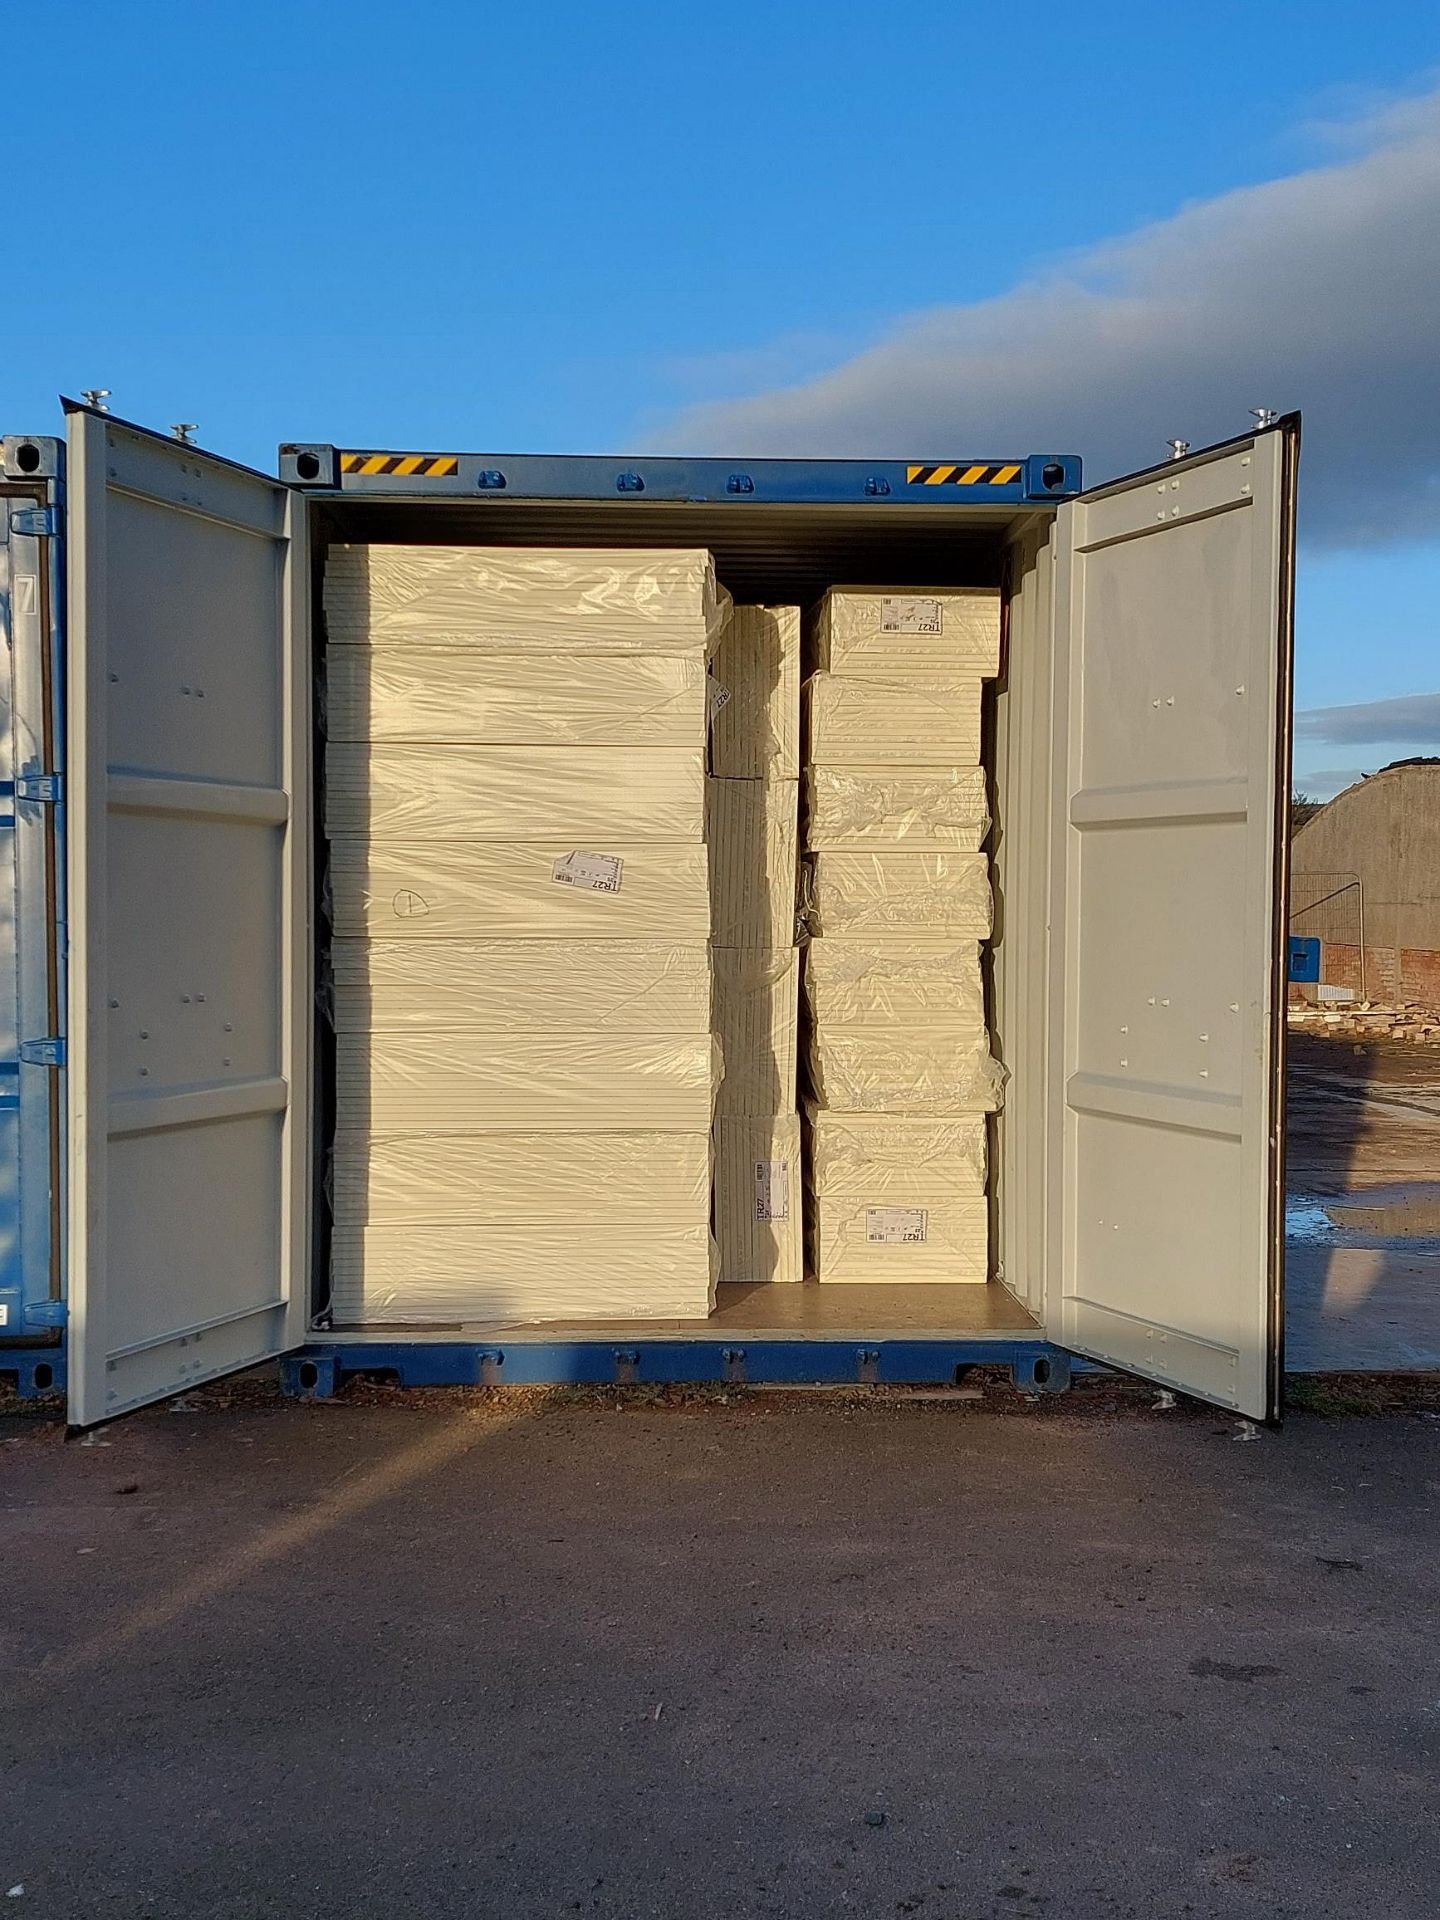 Contents only of 40' Container: Kingspan Thermaroof TR27 25mm insulation board.